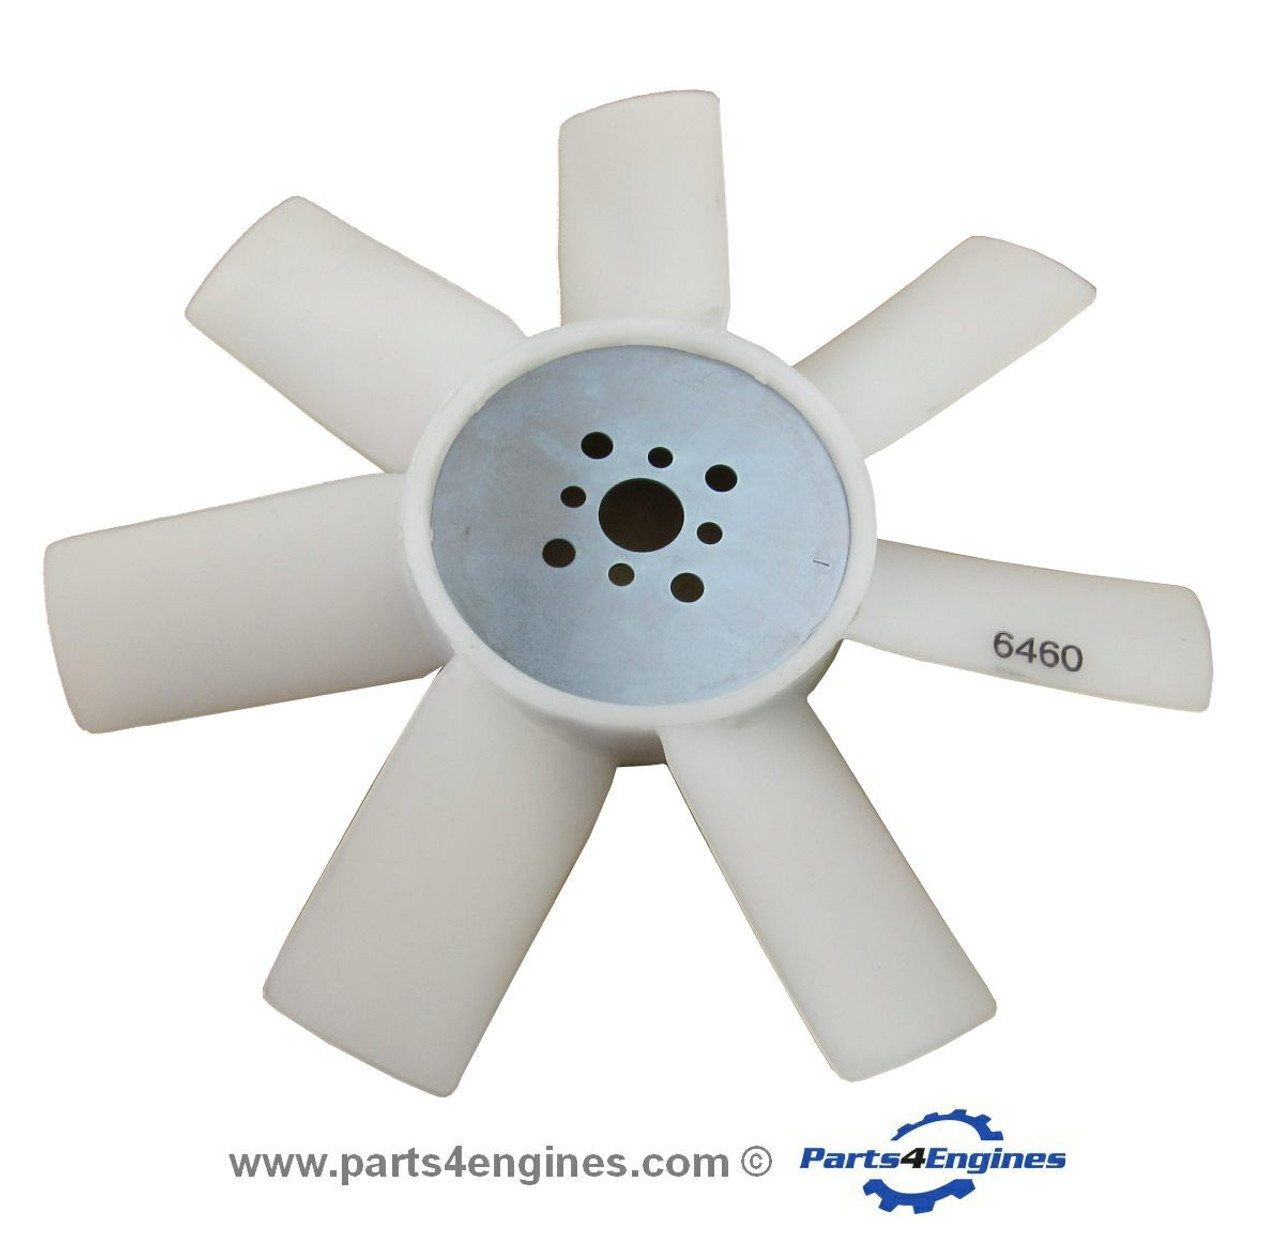 Perkins 403D-11 engine cooling fan, from parts4engines.com